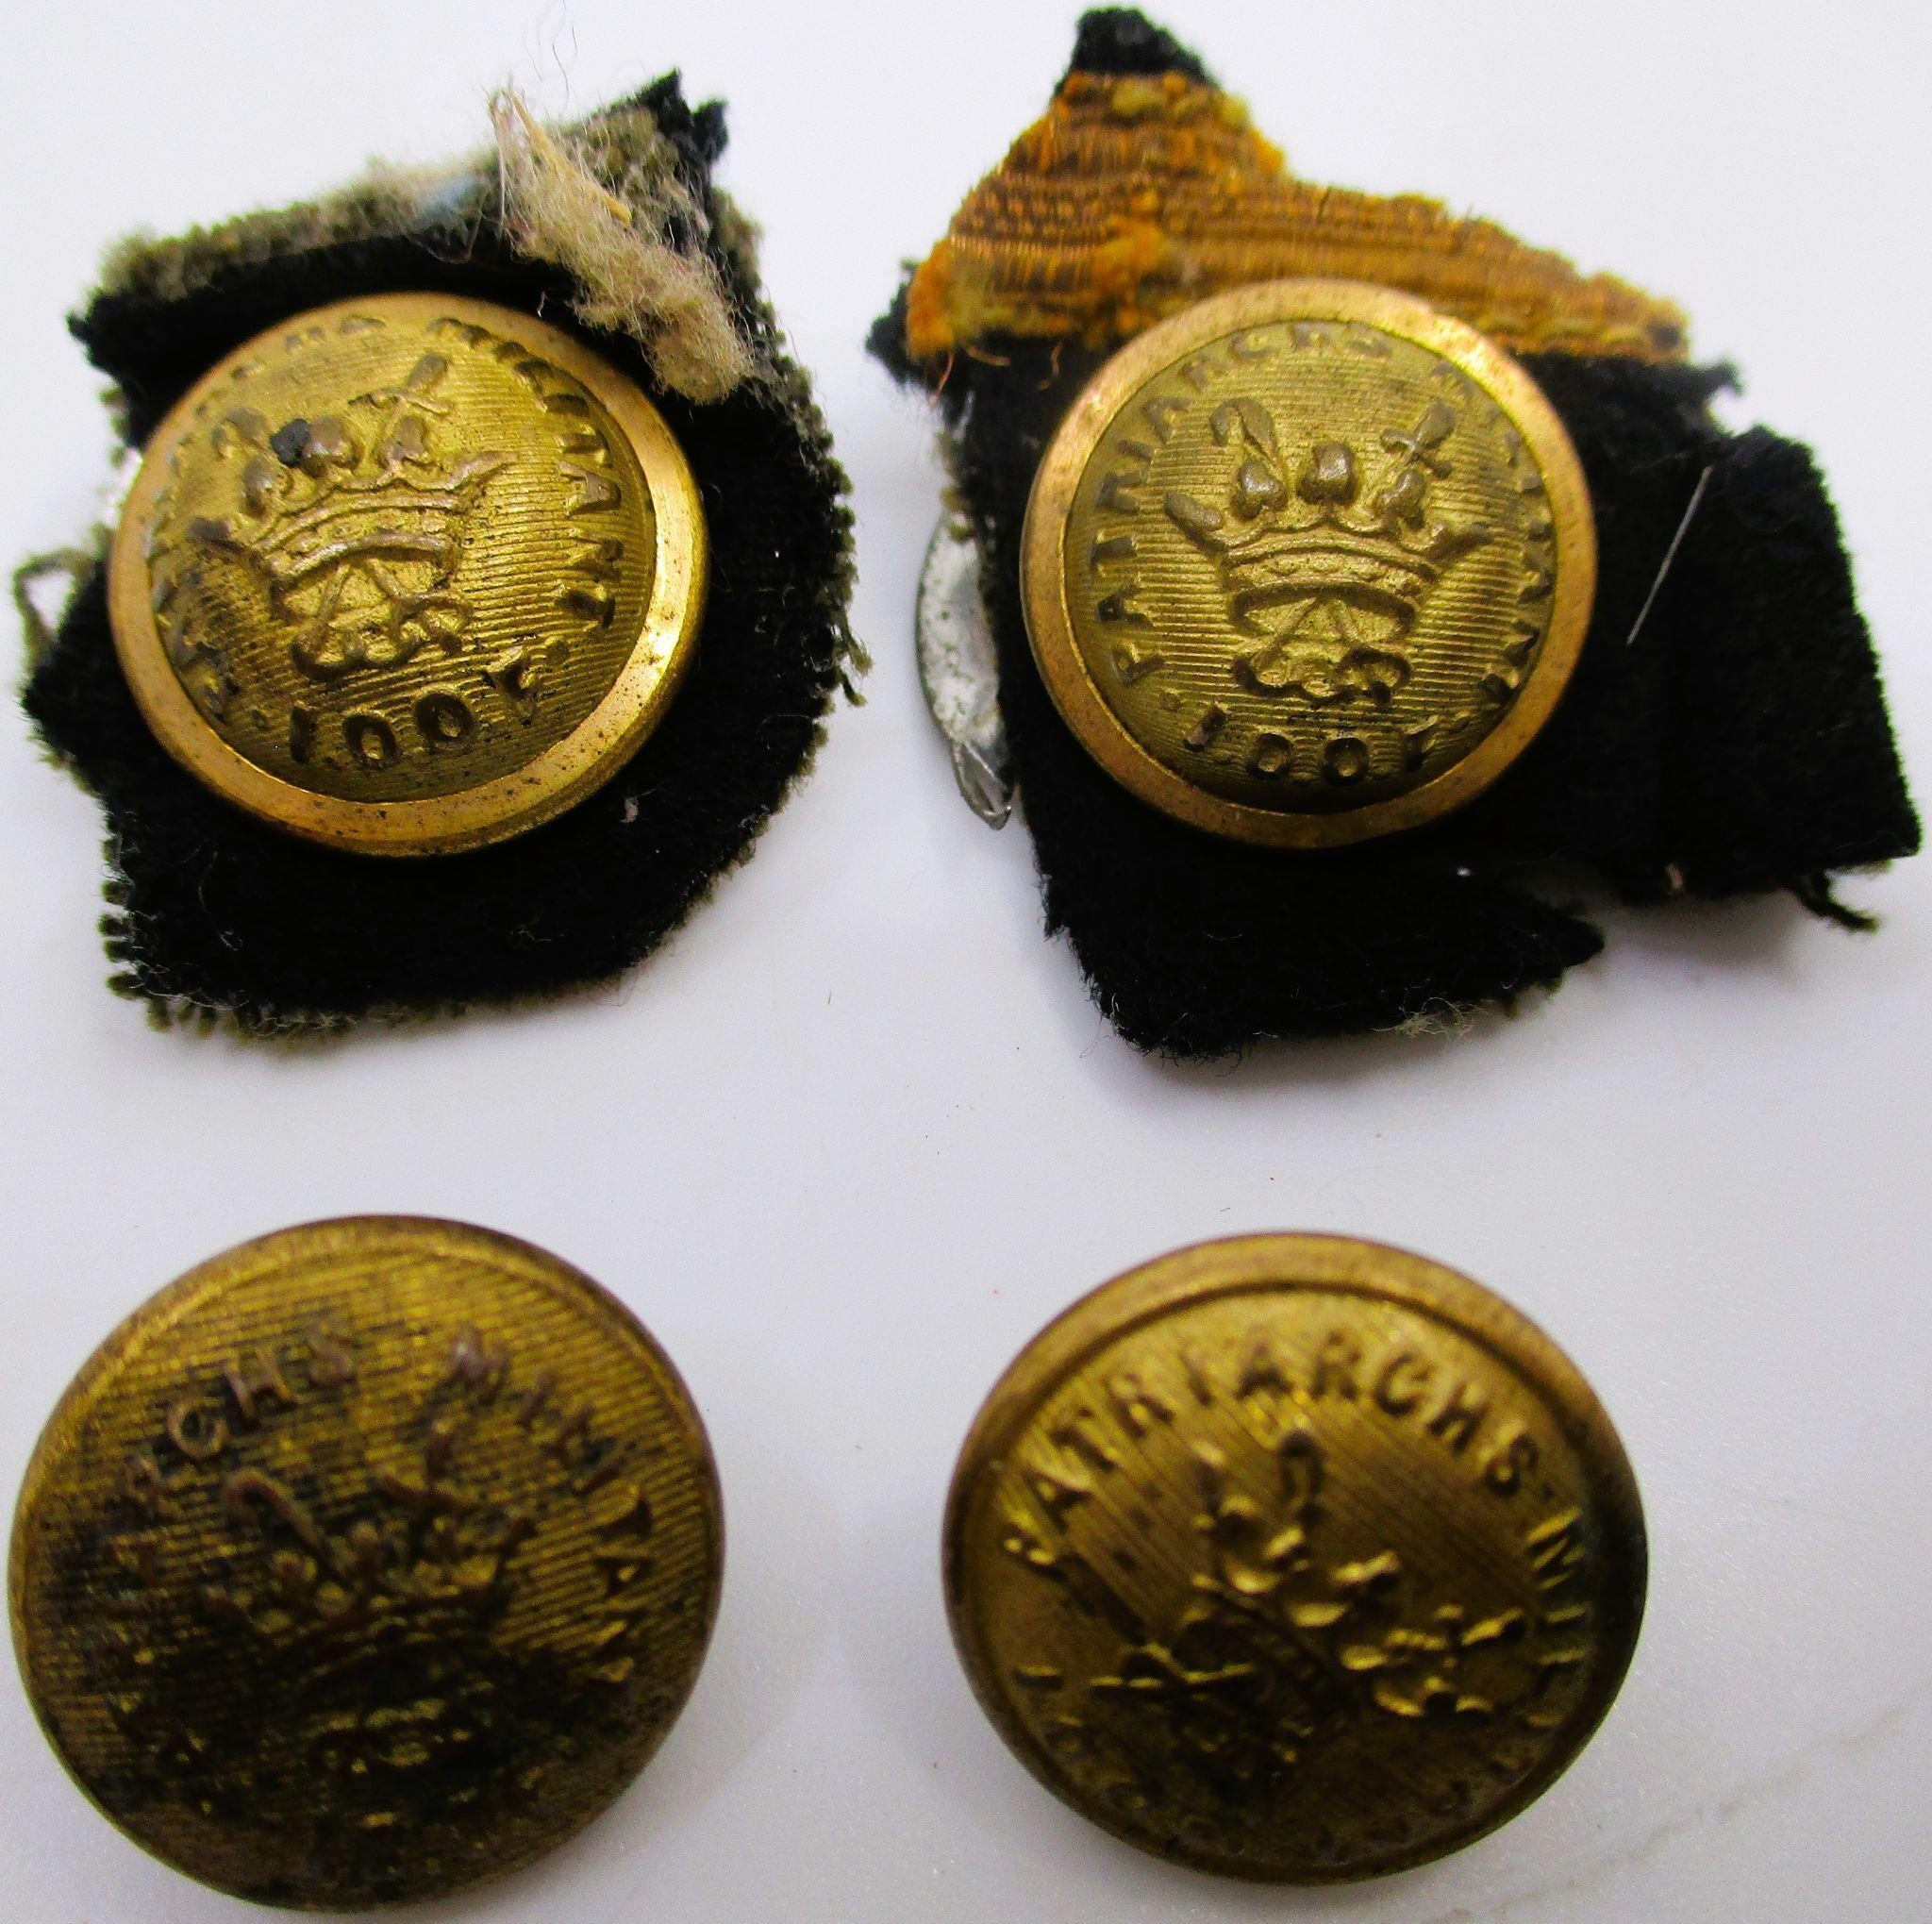 Lot of 4 IOOF Patriarchs Militant Buttons